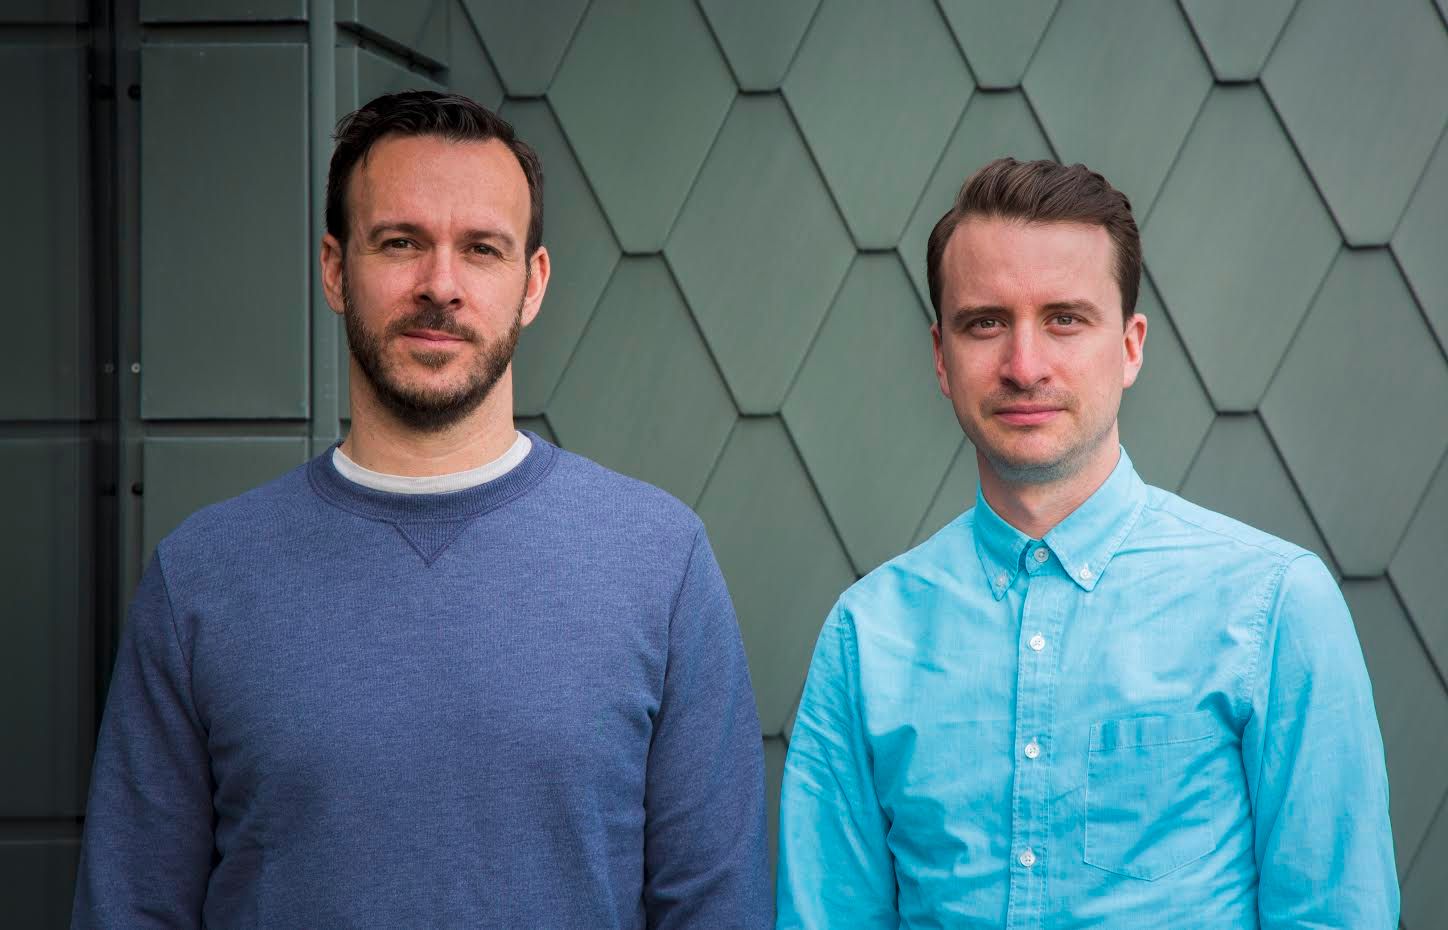 The Mill Appoints Darren O’Kelly as COO and Sean Costelloe as MD, London